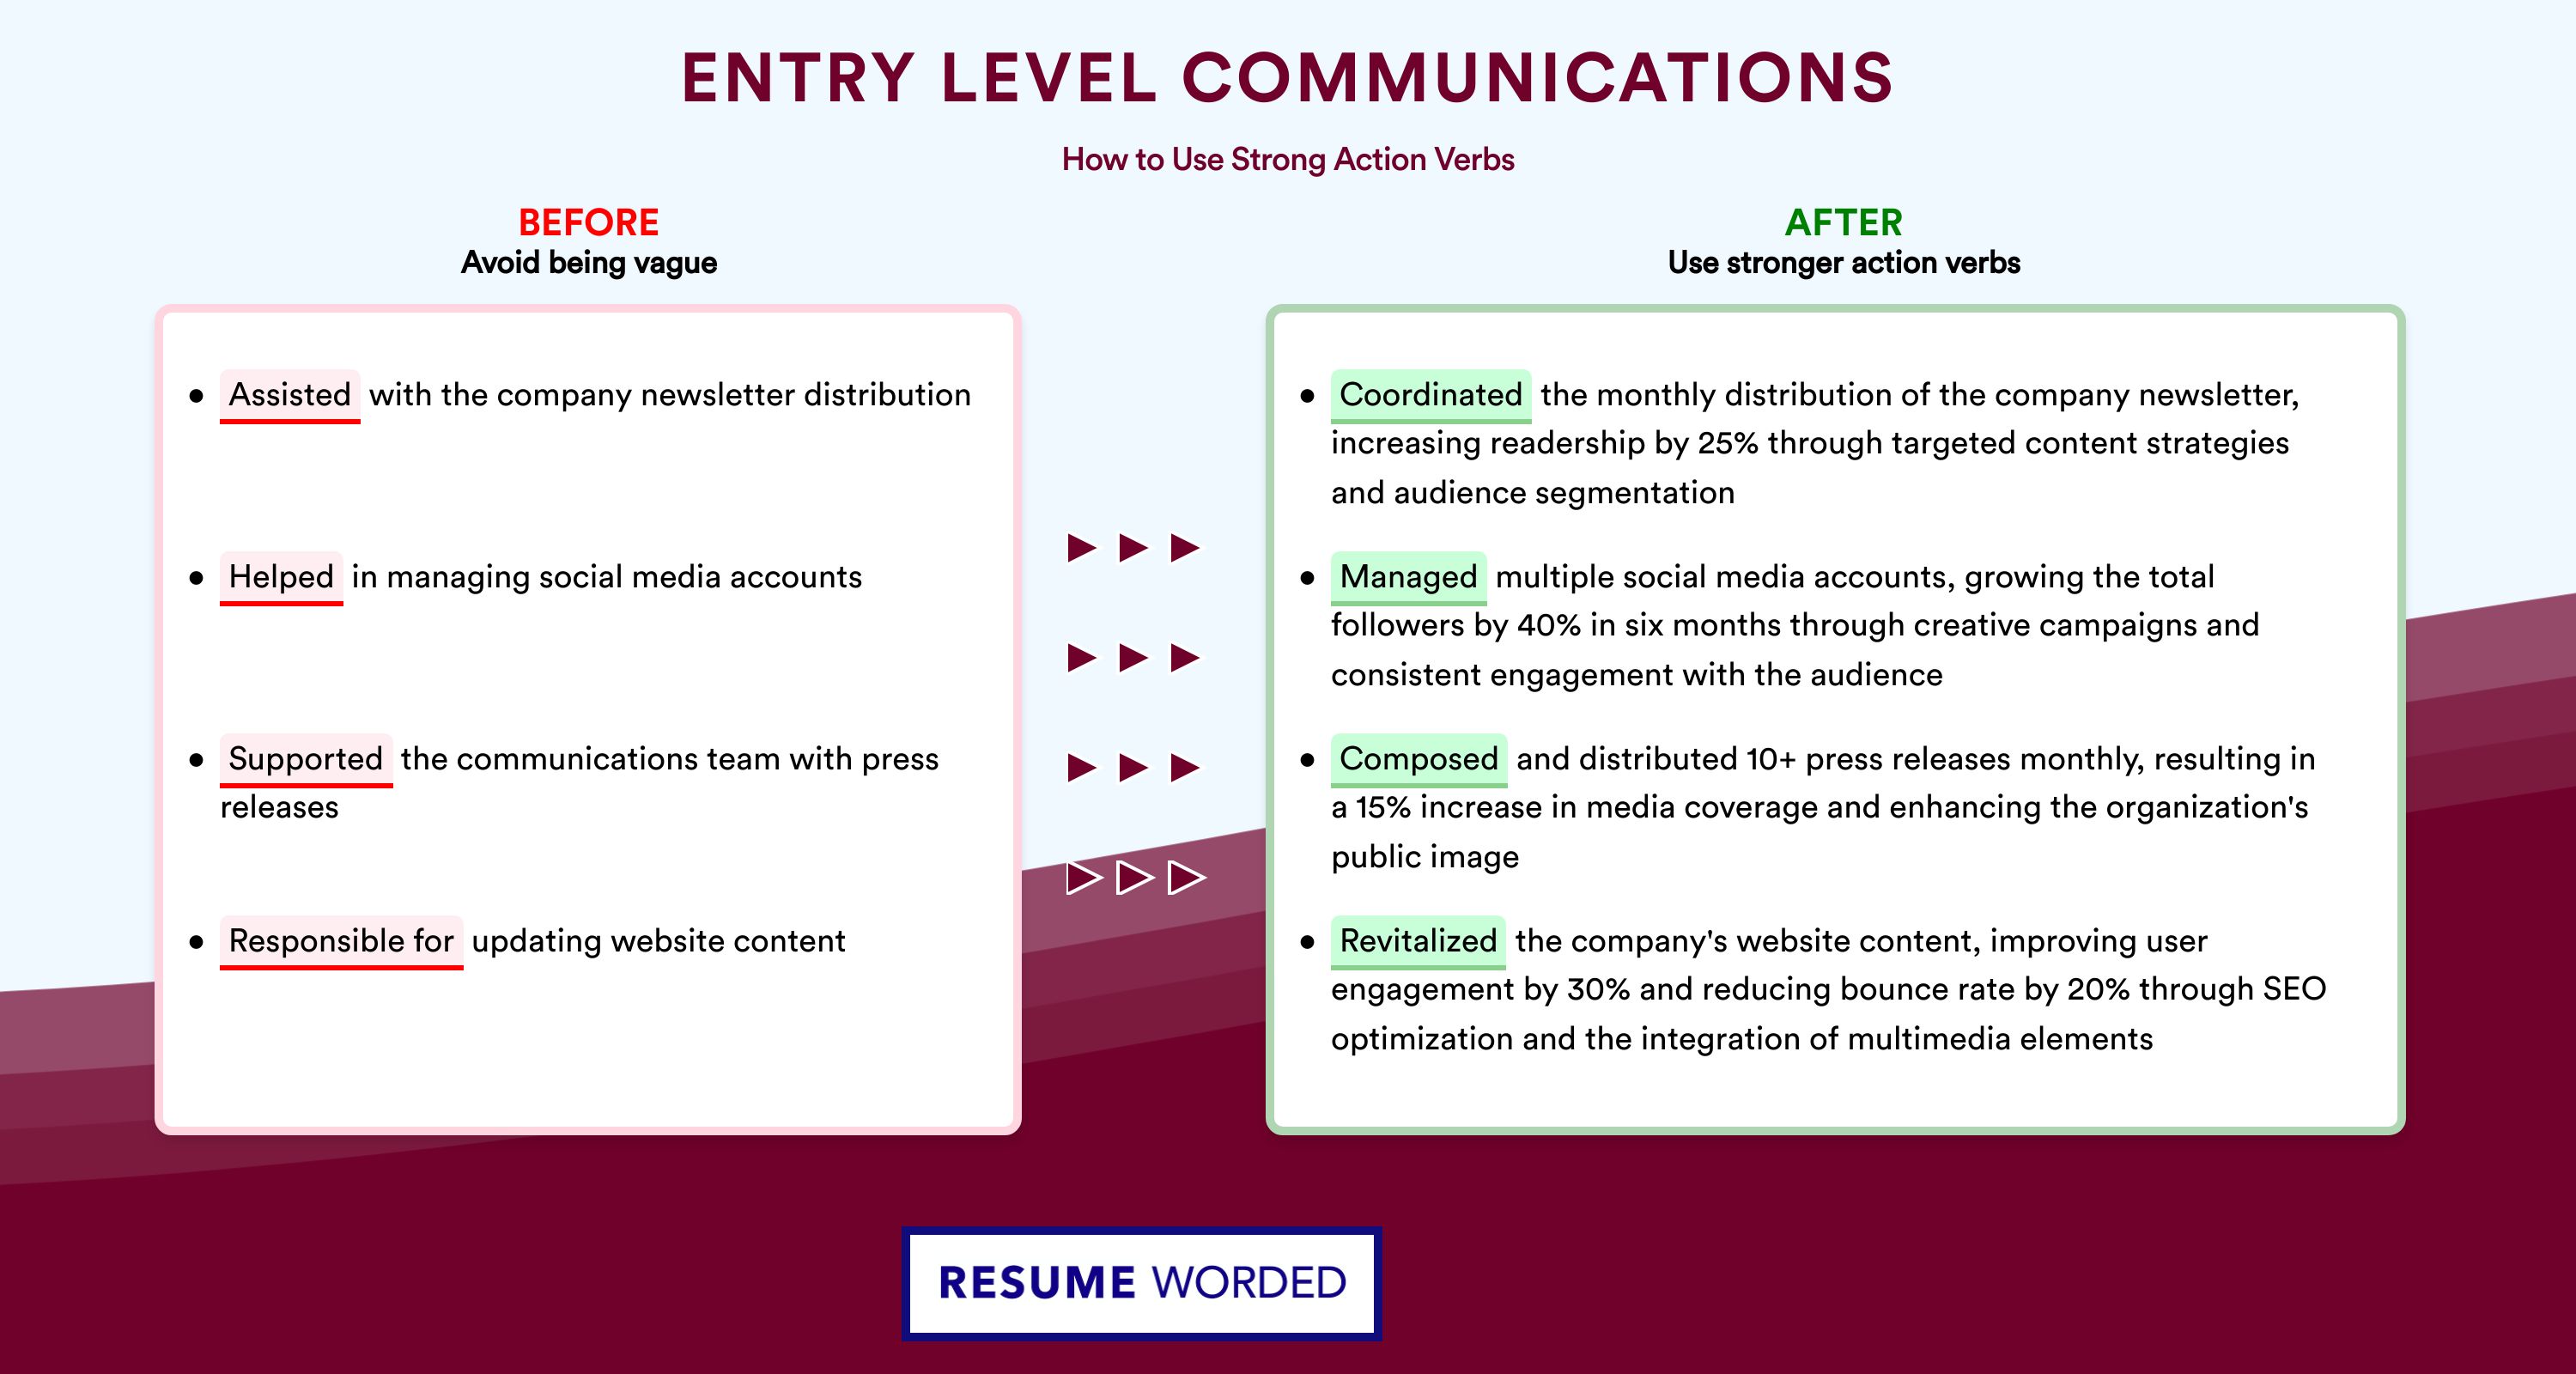 Action Verbs for Entry Level Communications